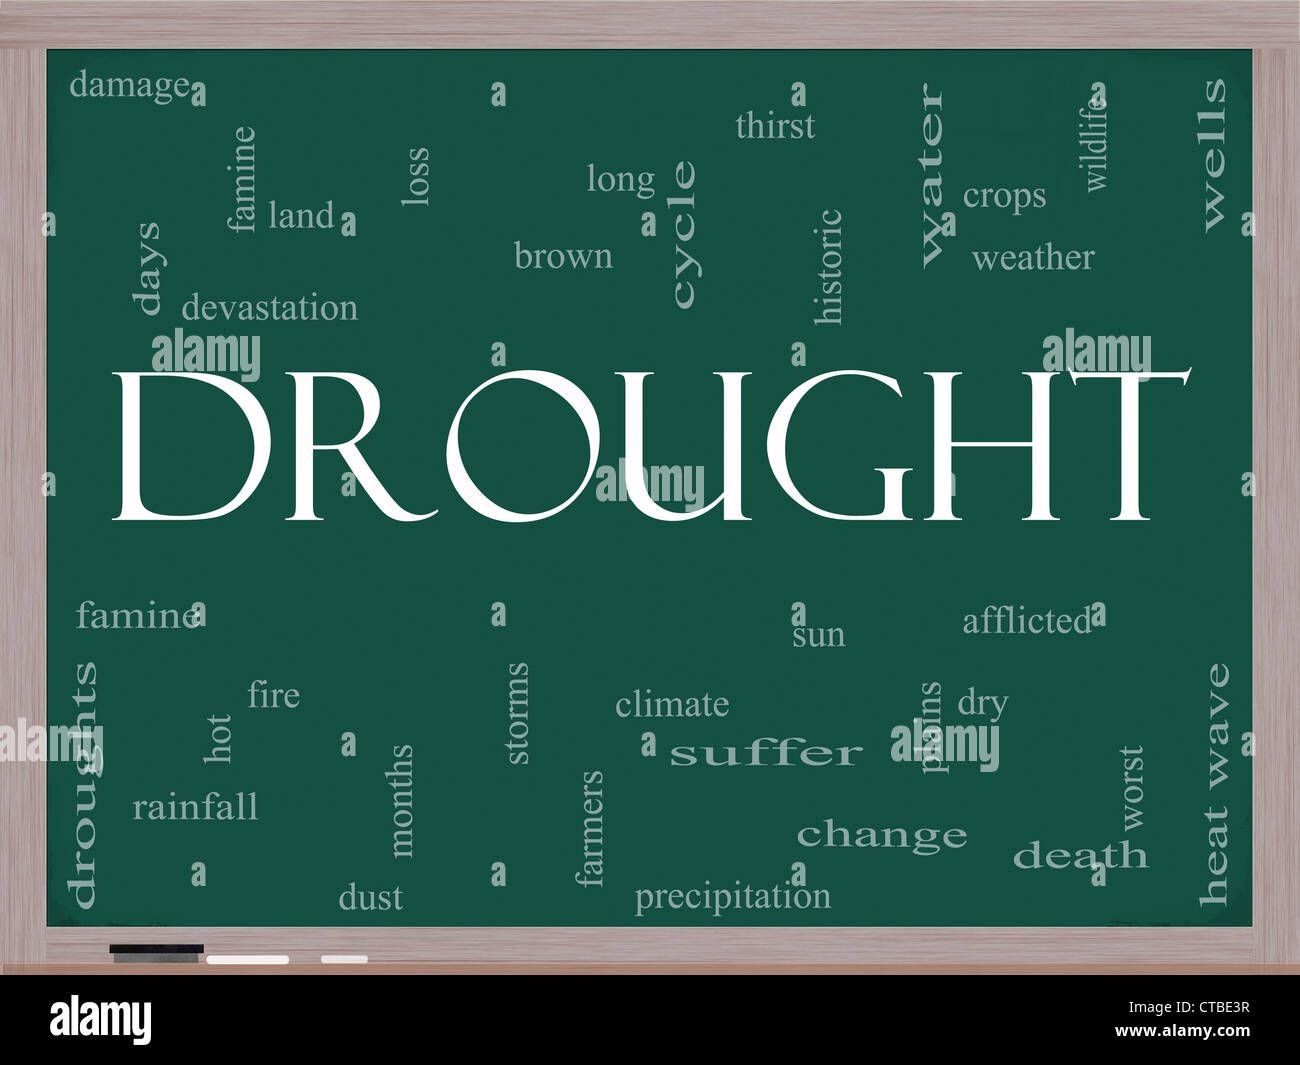 Drought Word Cloud Concept on a Blackboard with great terms such as water, crops, weather, dry, climate change and more Stock Photo